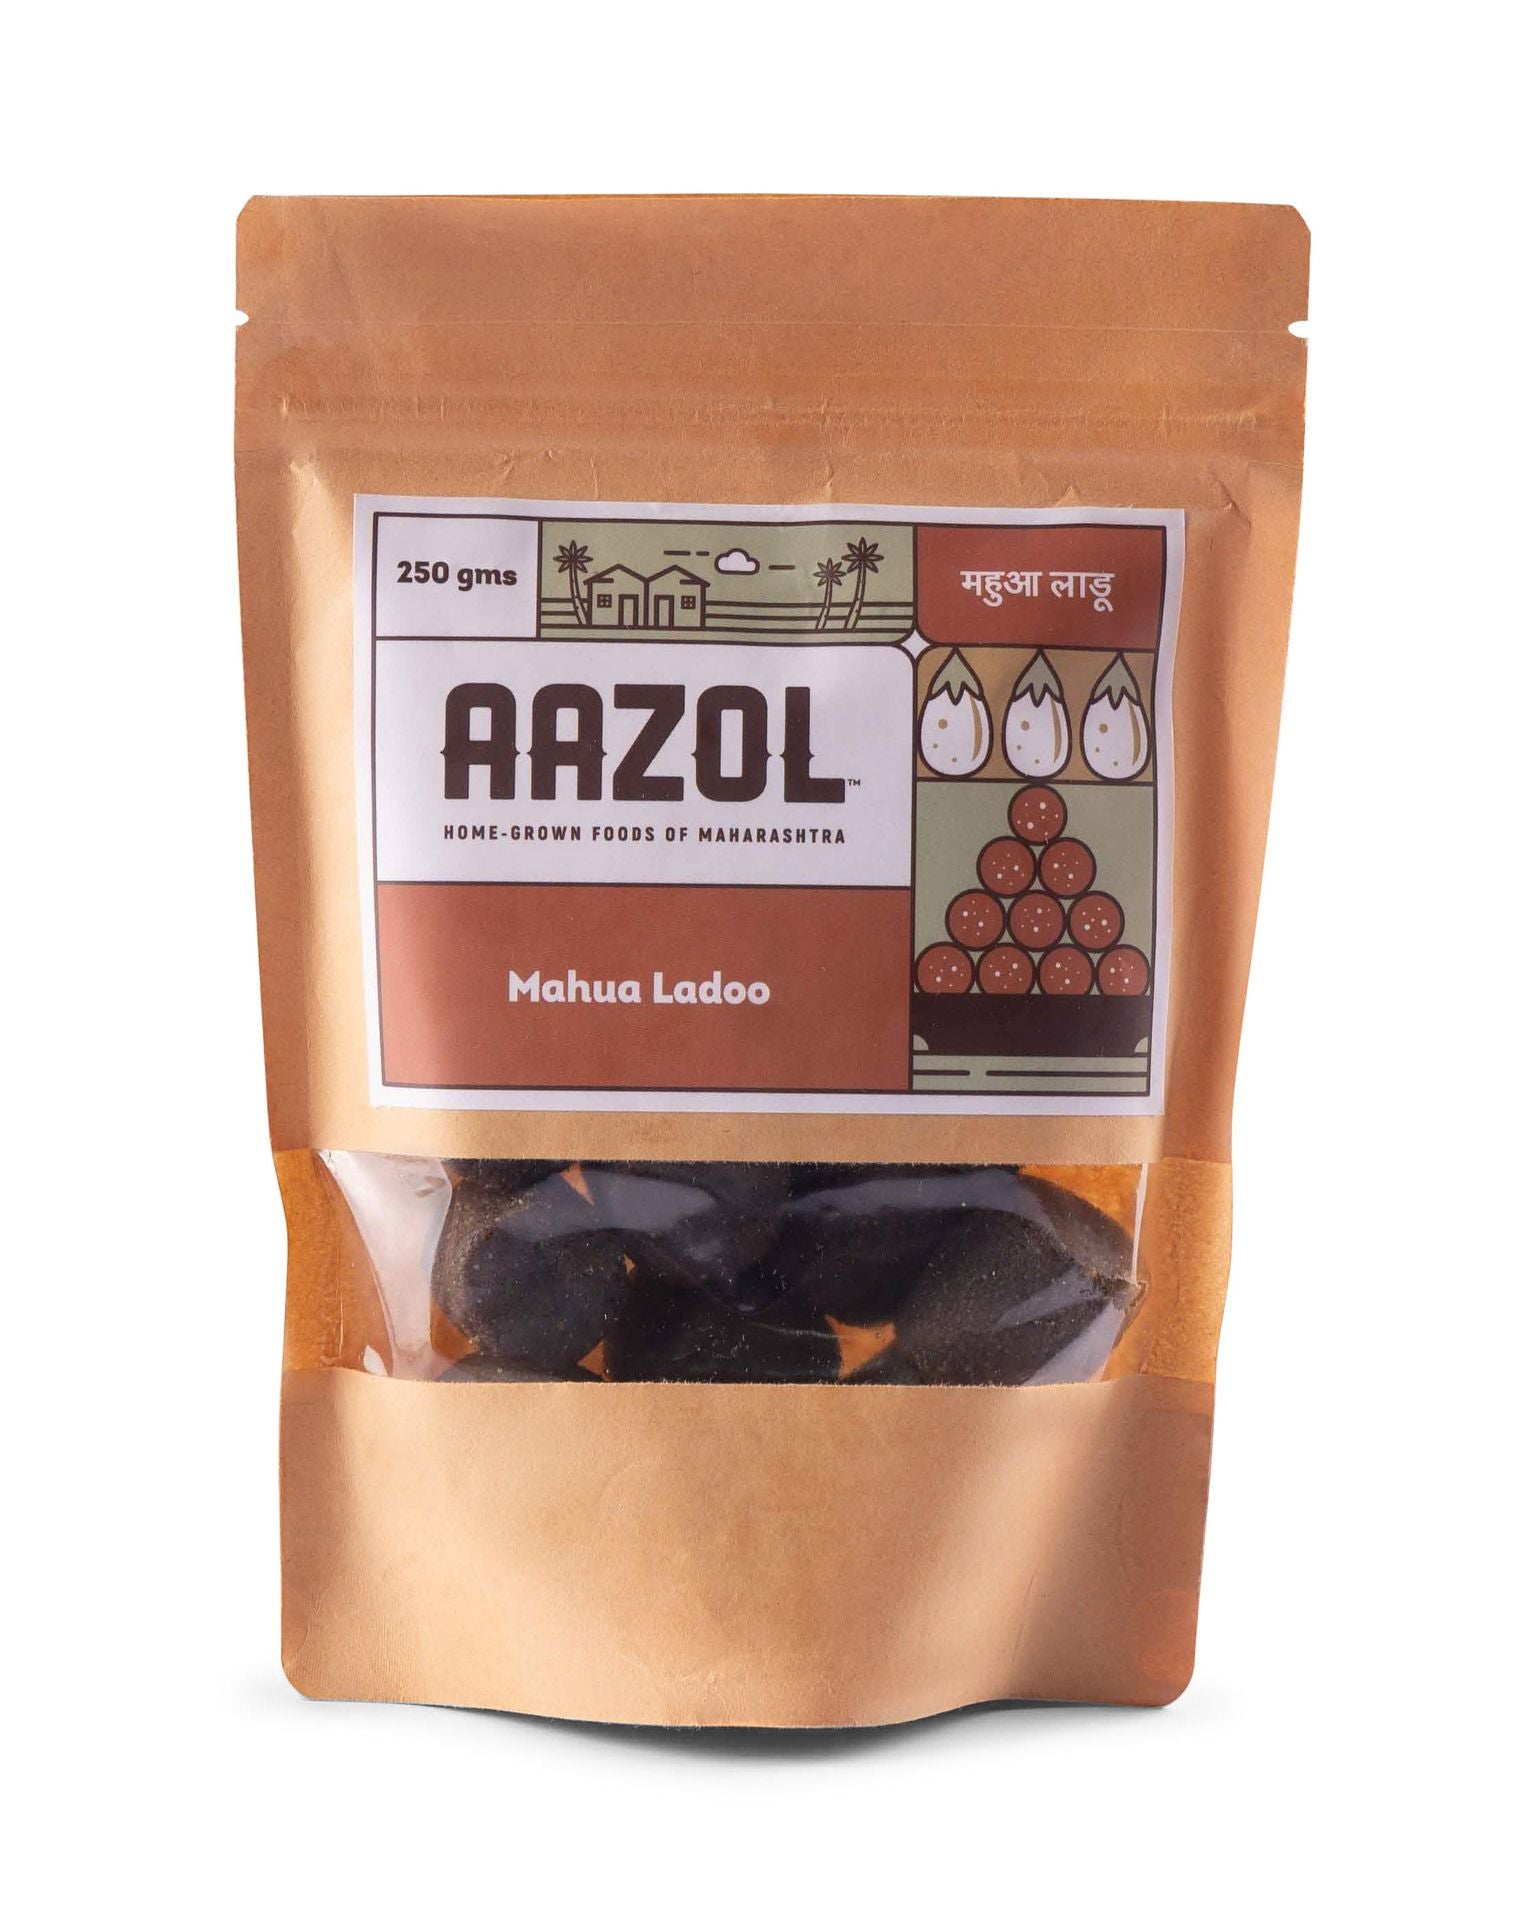 Aazol Mahua Ladoo: Forest Flower and Jaggery Nutri Ball - 250gms (Pack of 2) - hfnl!fe